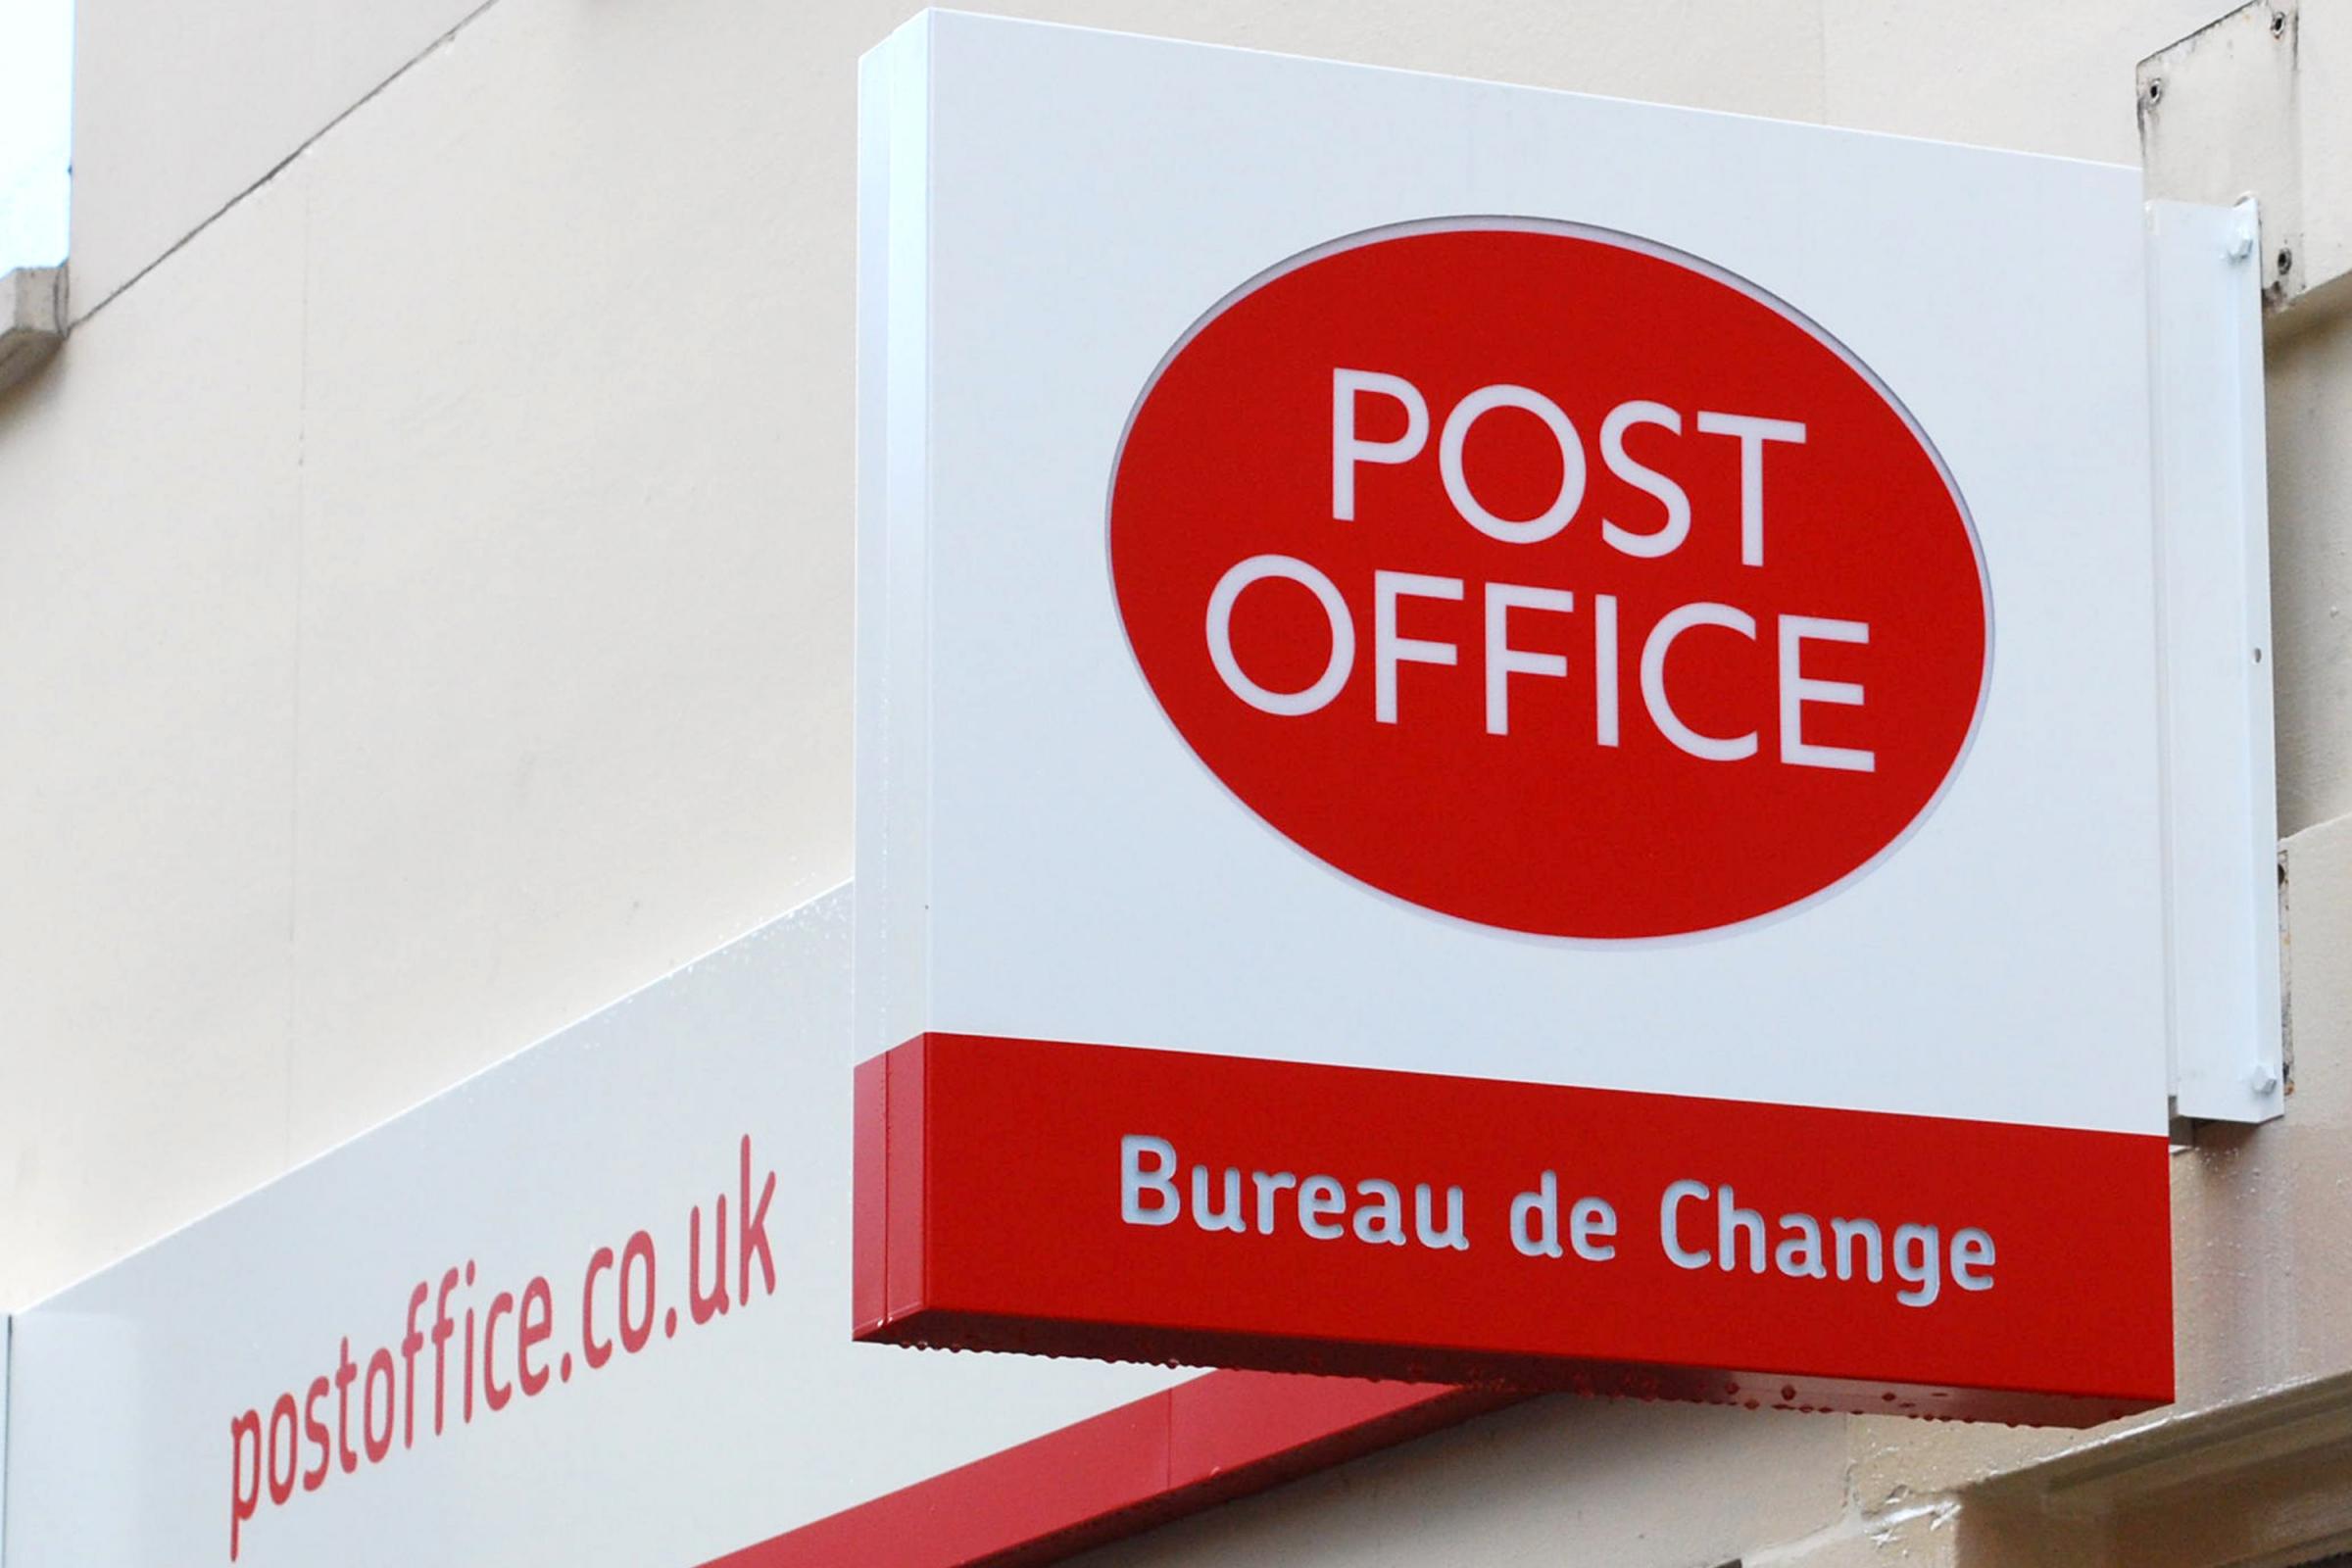 There have been calls for former Post Office chief executive Paula Vennells to be stripped of her CBE over the Horizon scandal that was laid bare in the ITV drama Mr Bates vs The Post Office (Image: PA)